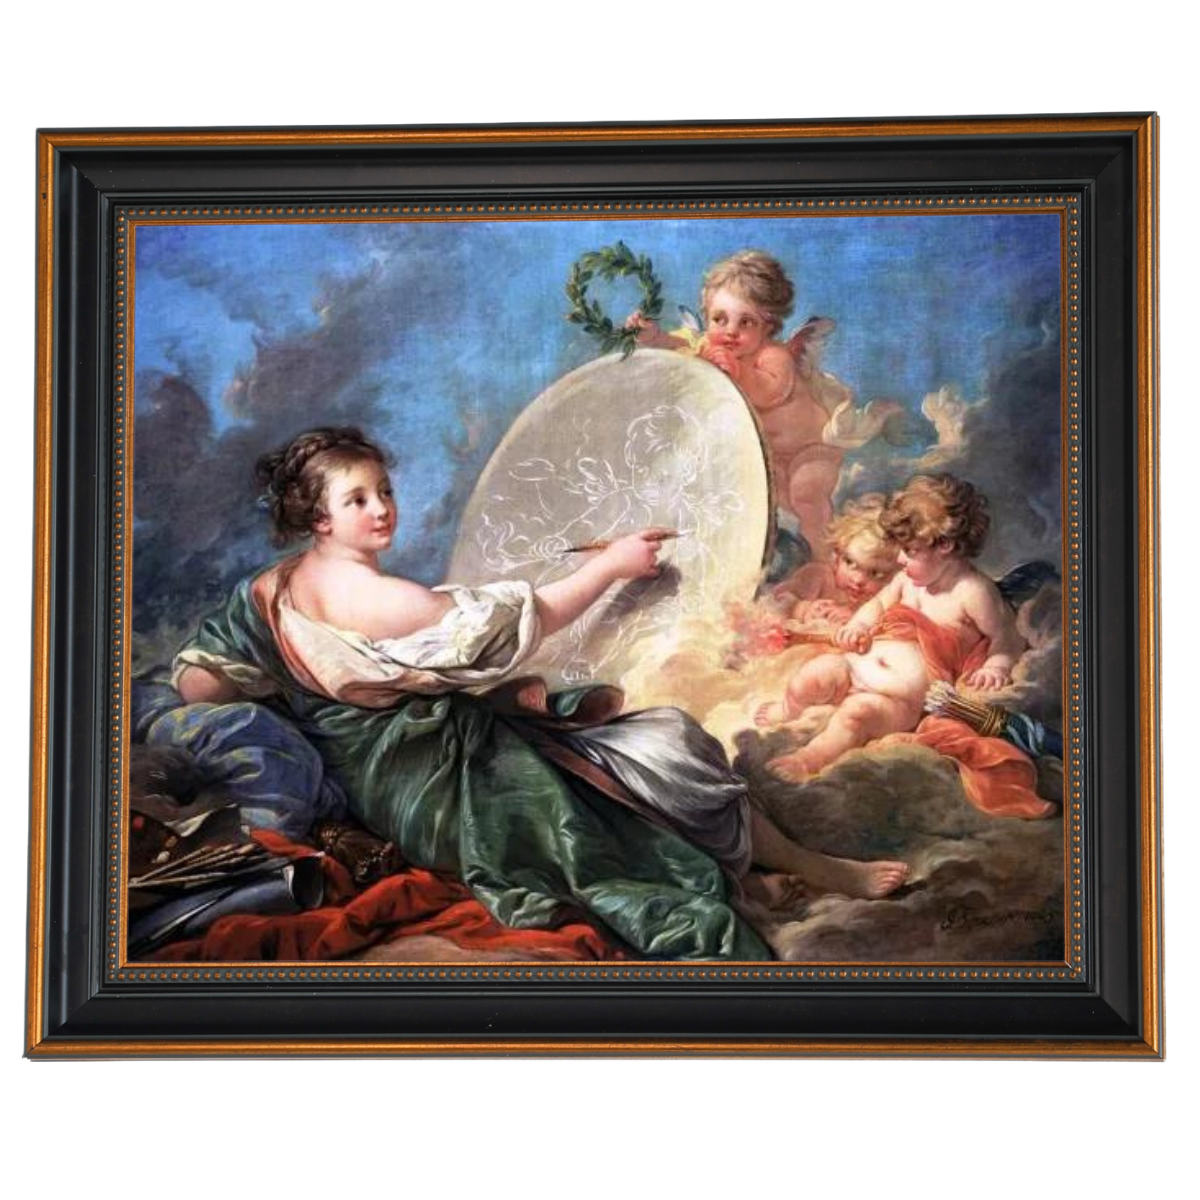 Allegory Of Painting - Vintage Wall Art Print For Living Room Decor 